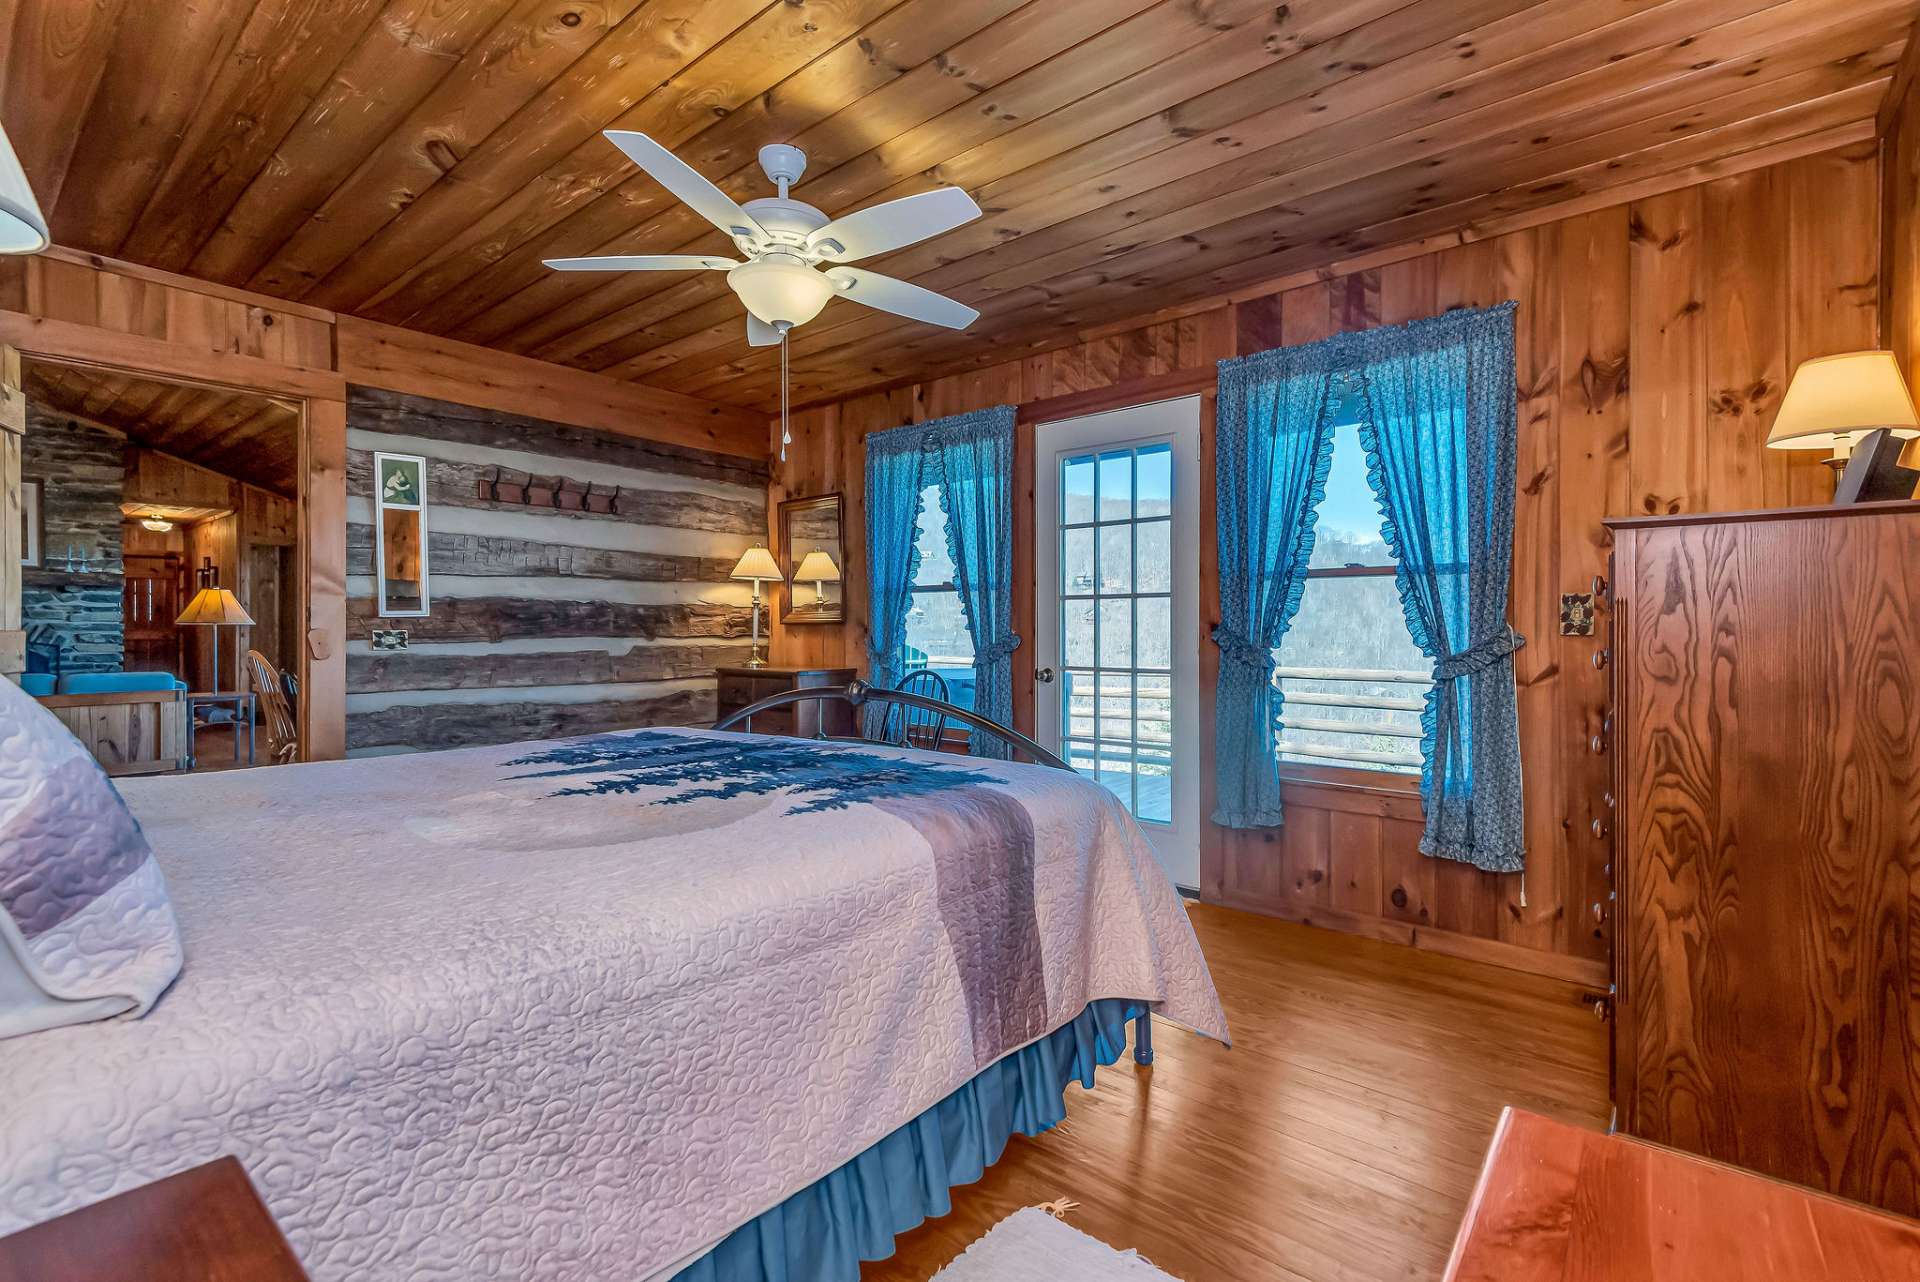 Enjoy breakfast in bed with beautiful sunrise views and convenient access to the open deck.